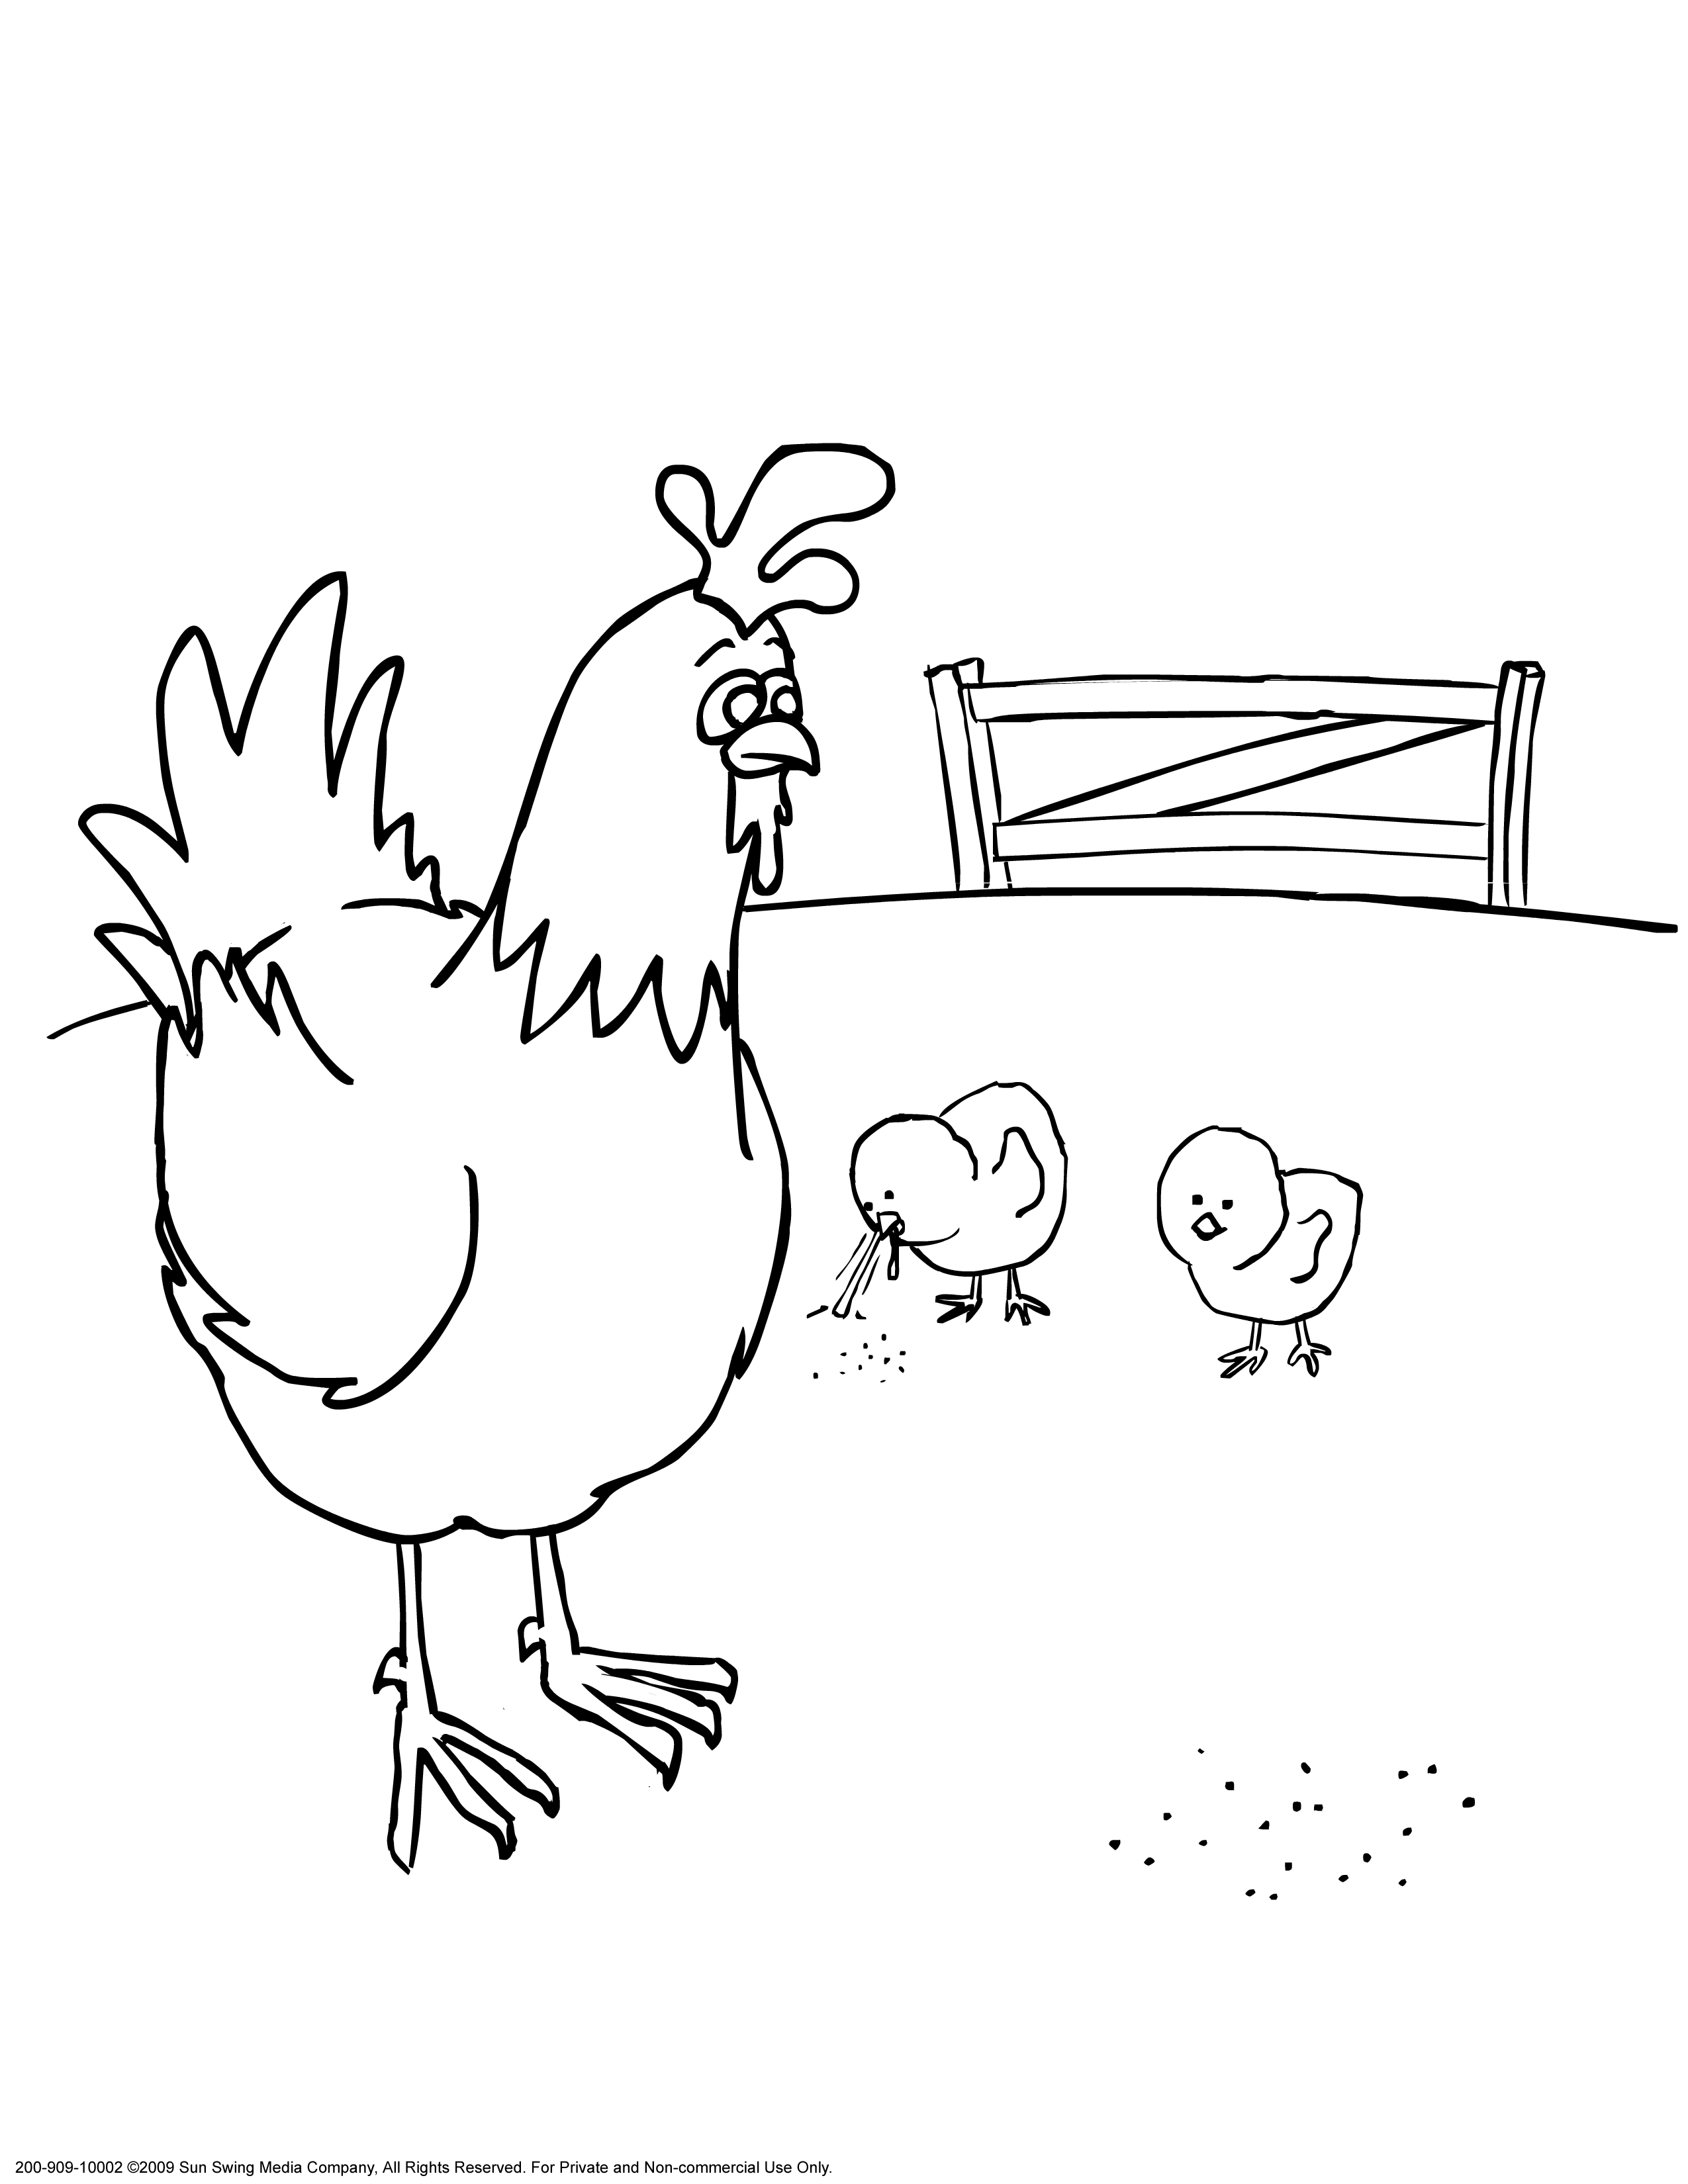 The Little Red Hen Coloring Pages Coloring Pages Free Little Red Hen Stories And Tales Coloringges